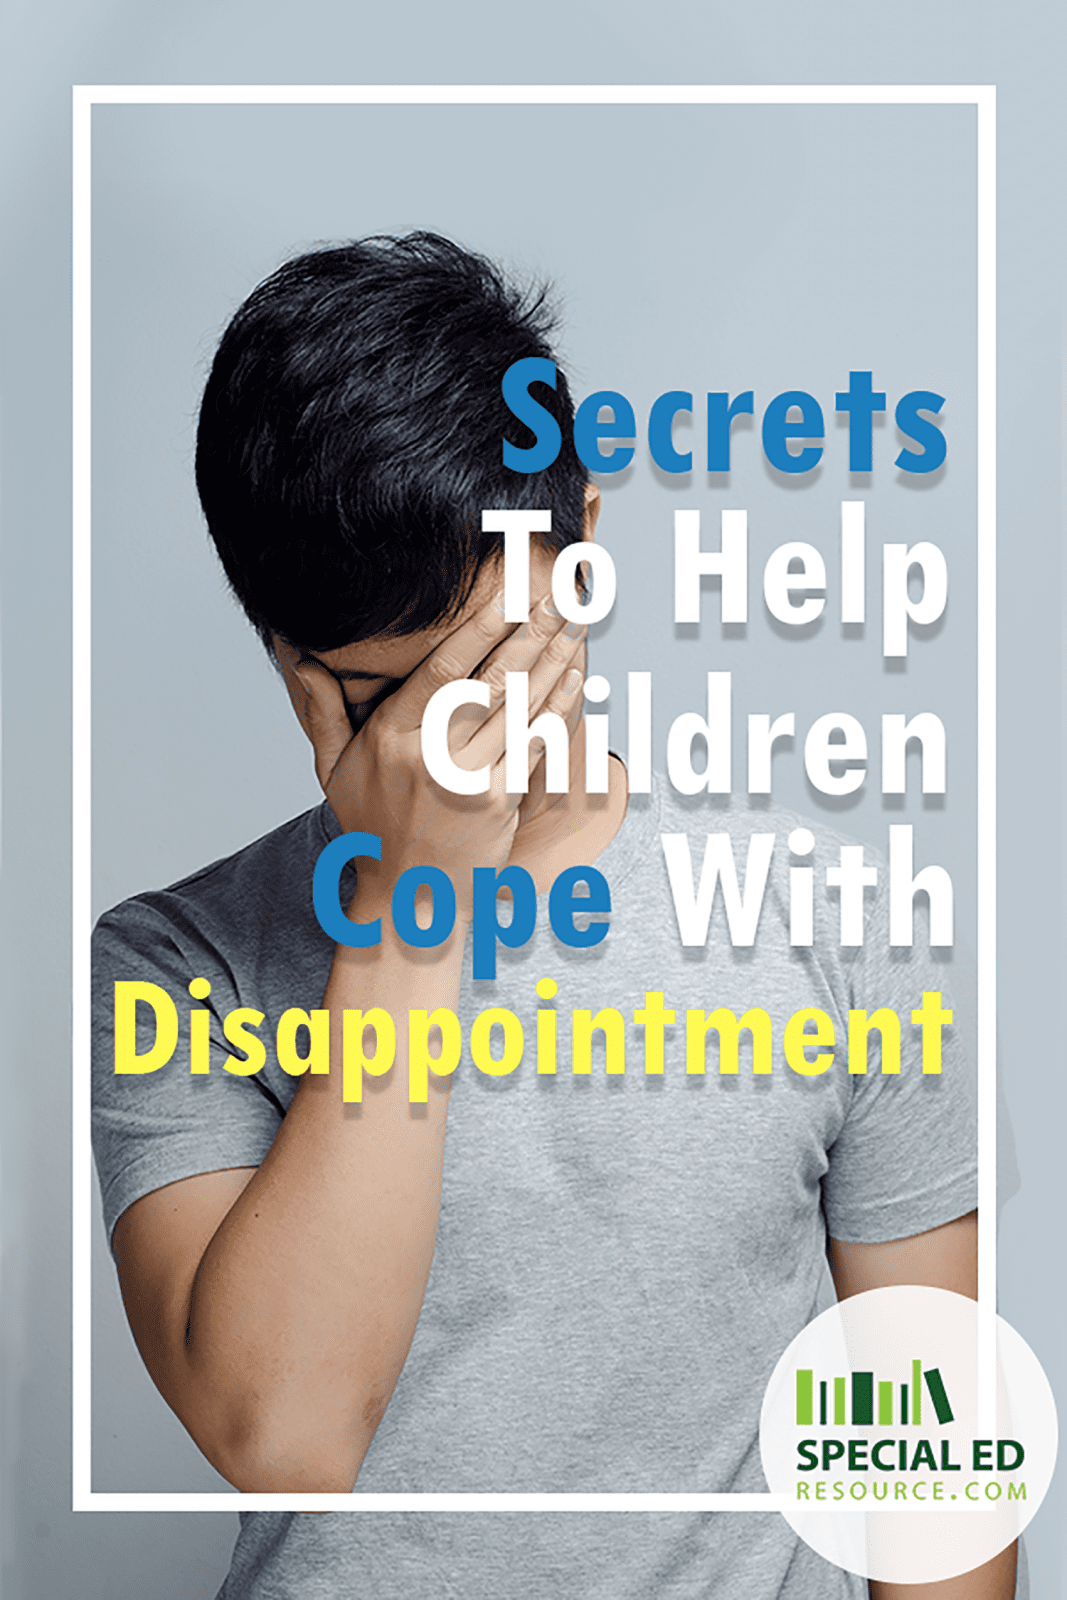 Secrets to Help Children Cope With Disappointment